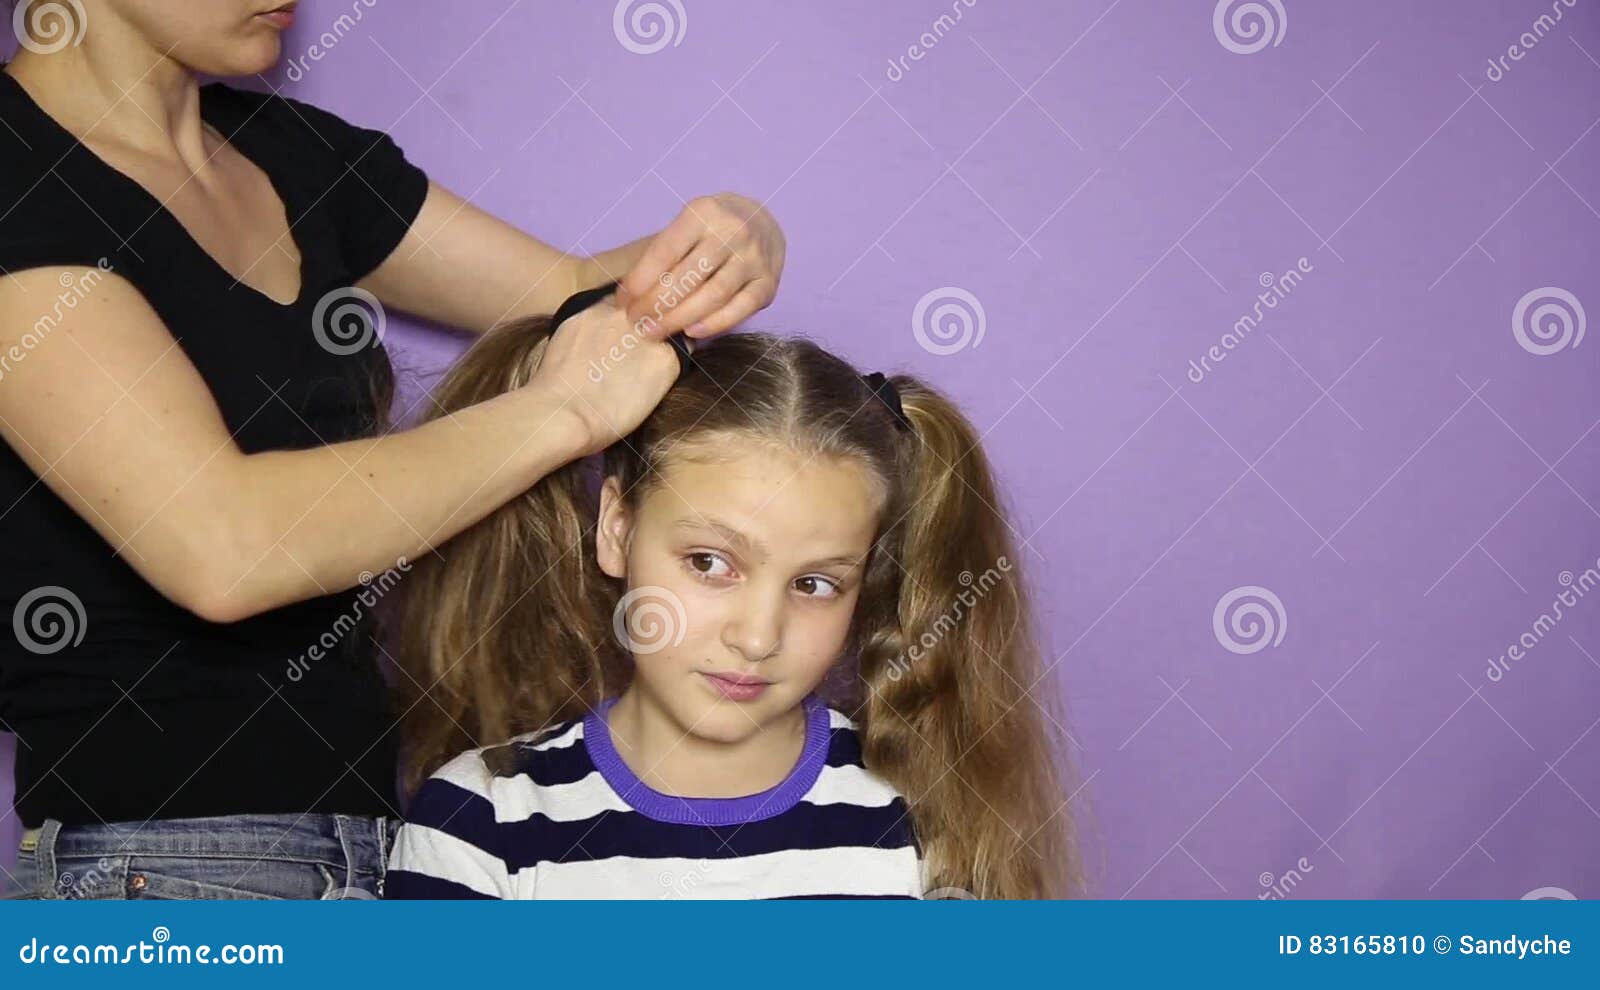 Weave a Little Cute Girl Pigtails. the Barber Makes a Girl Hairstyle. Stock  Footage - Video of braided, finger: 83165810